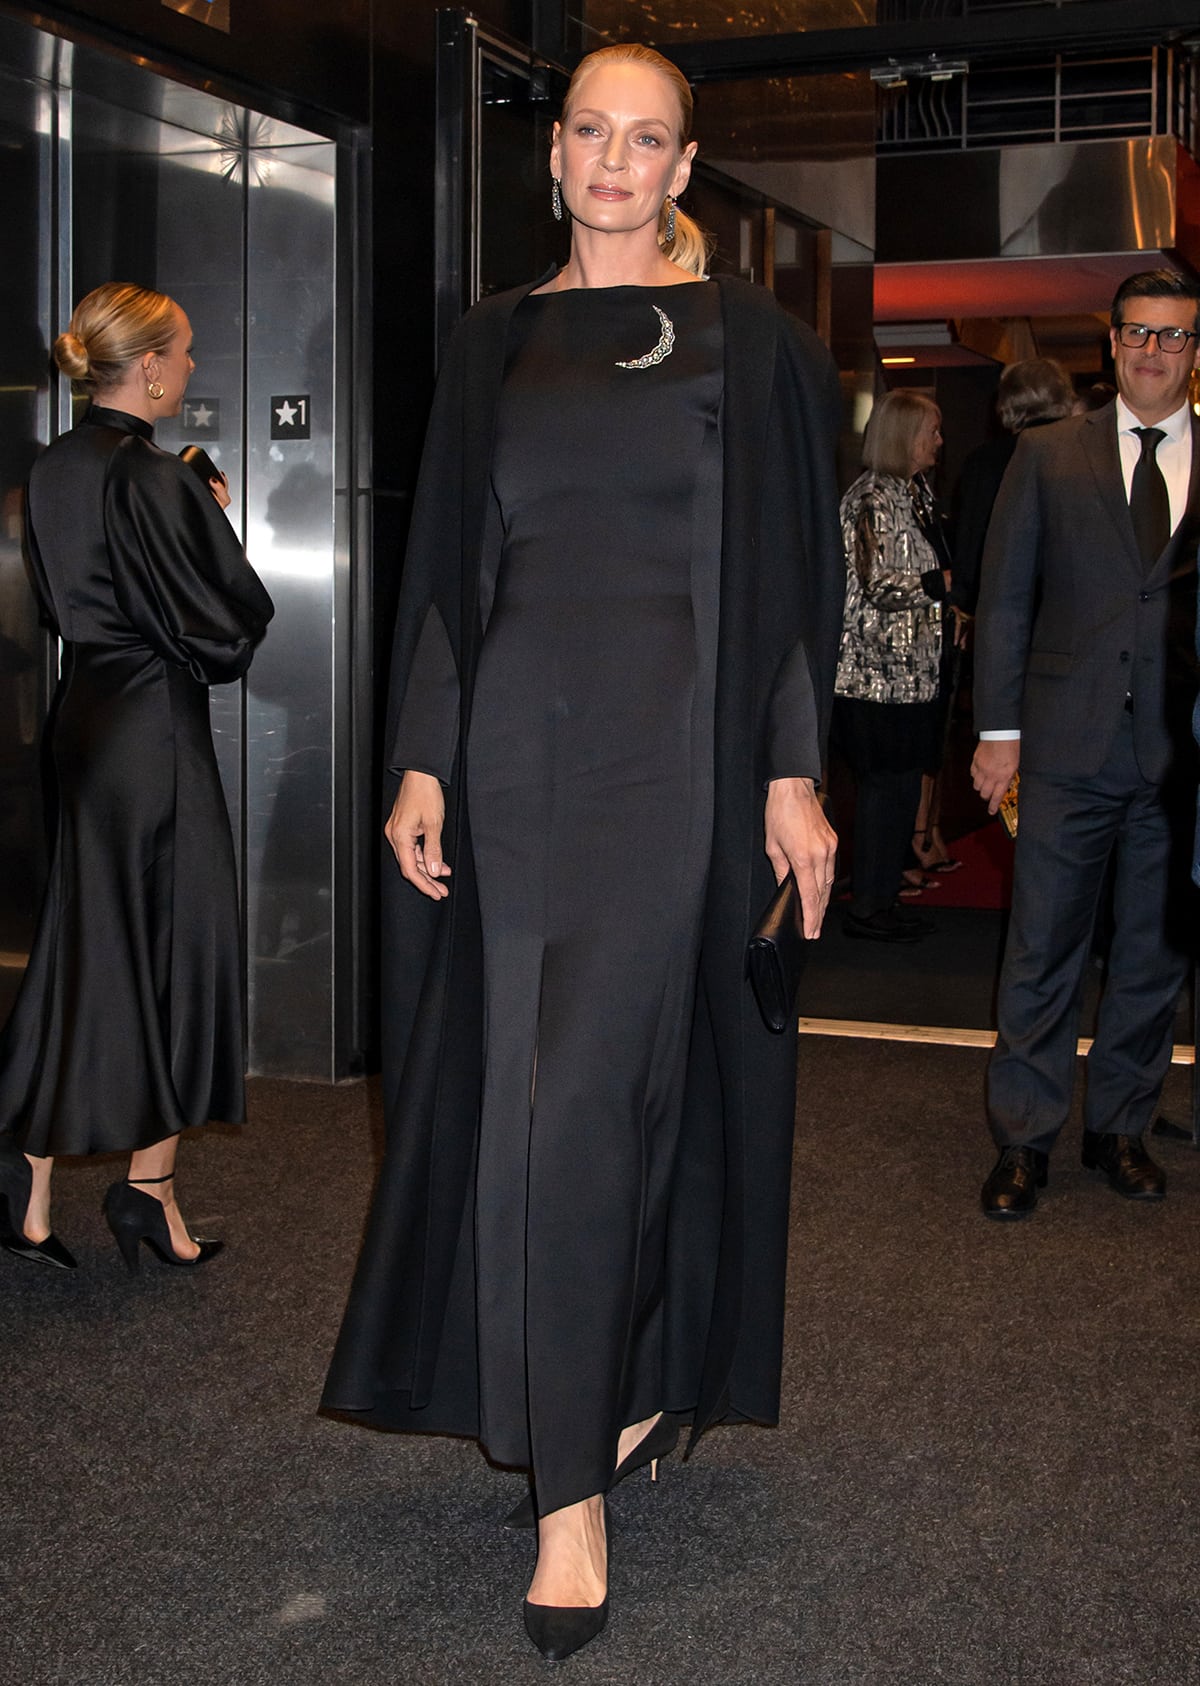 Uma Thurman looks regal in a black column dress with a moon crescent brooch, a matching cape, and black pumps